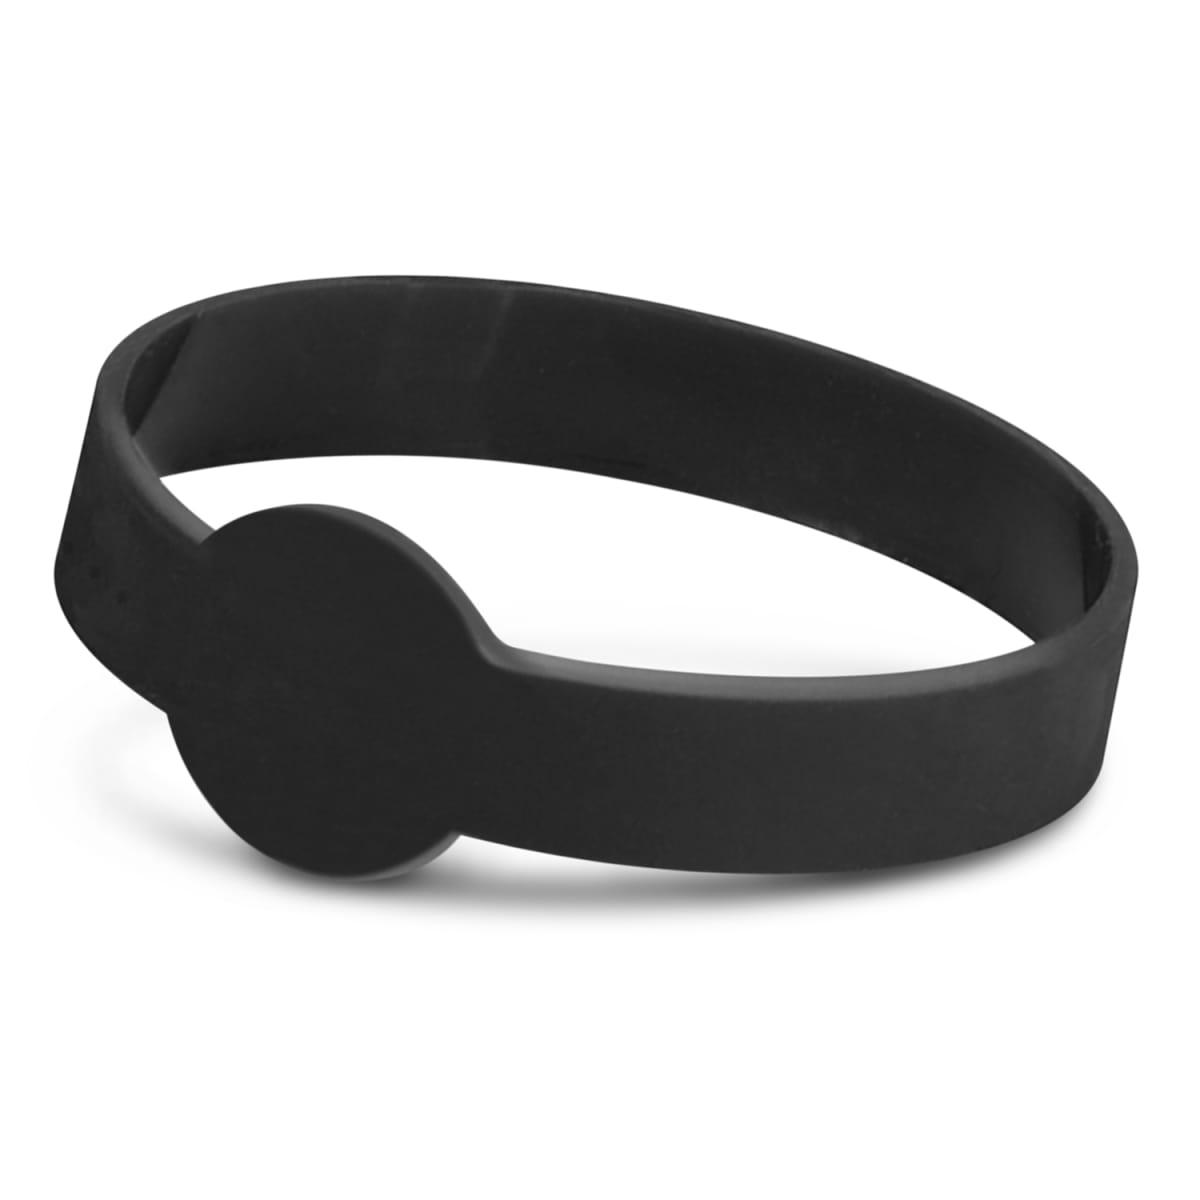 Xtra Silicone Wrist Band - Embossed